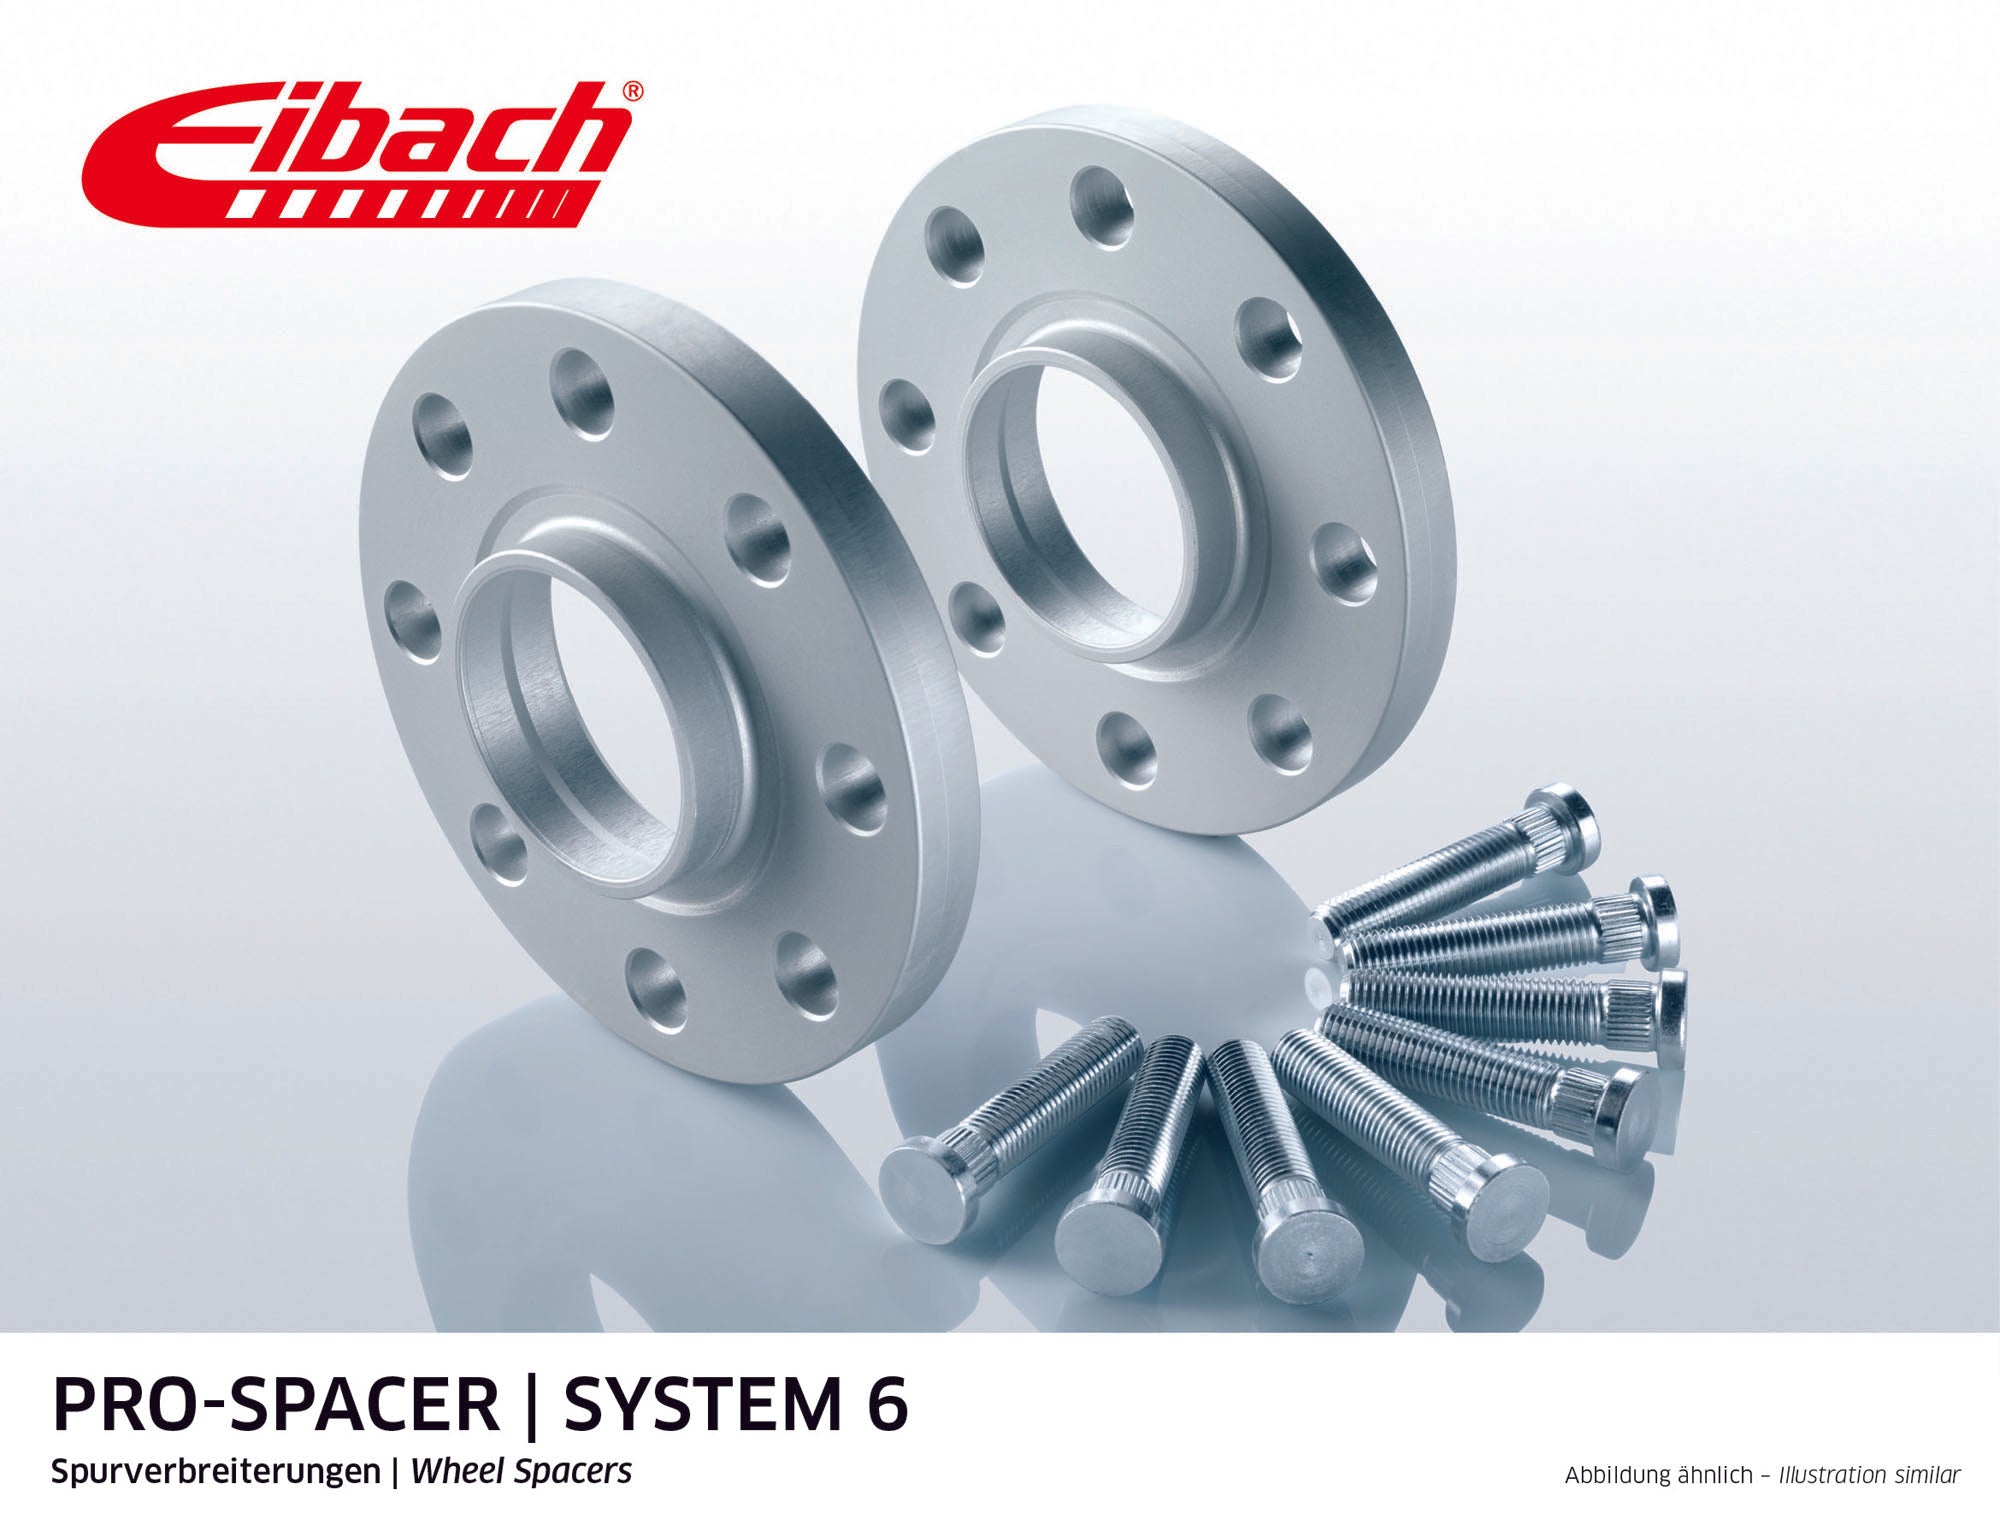 Eibach 18mm Pro-Spacer - Silver Anodized Wheel Spacer 911 1982-89 #S90-6-18-001